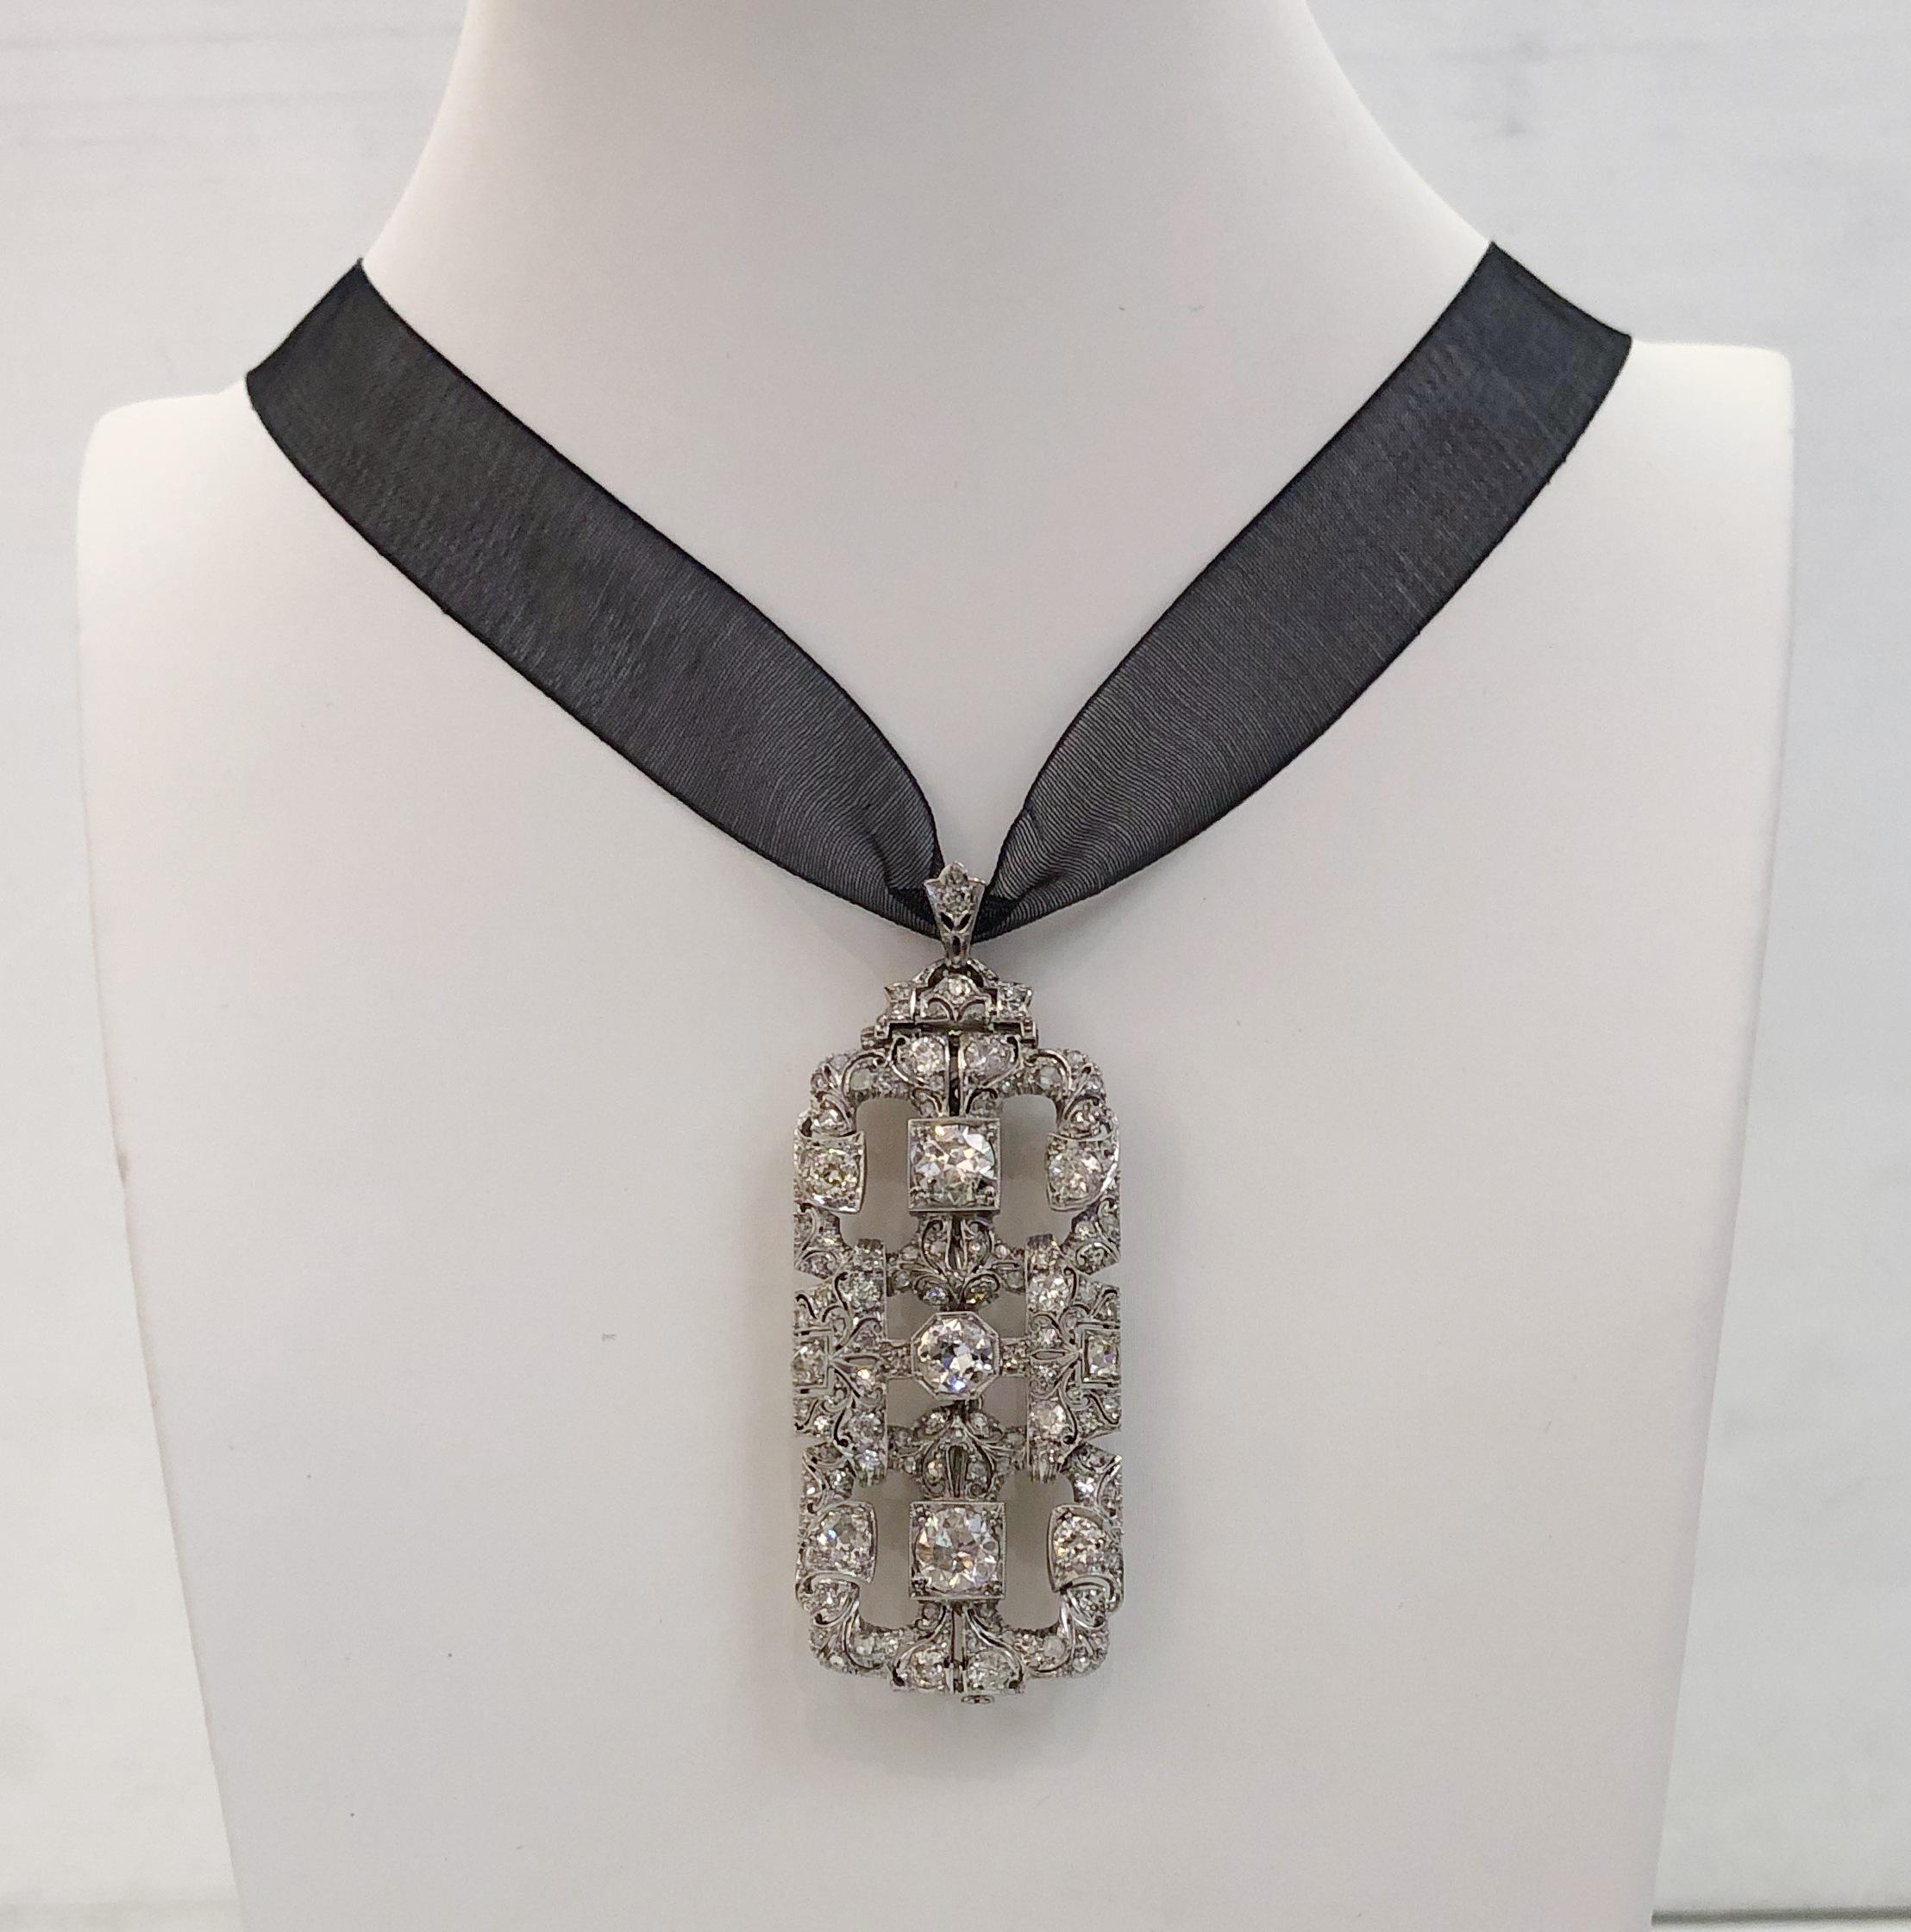 Vintage Italian platinum pendant convertible into a millilgrain fretwork brooch,  set with 4.5 karats of diamonds / Made in Italy 1930s
Length 6.5cm